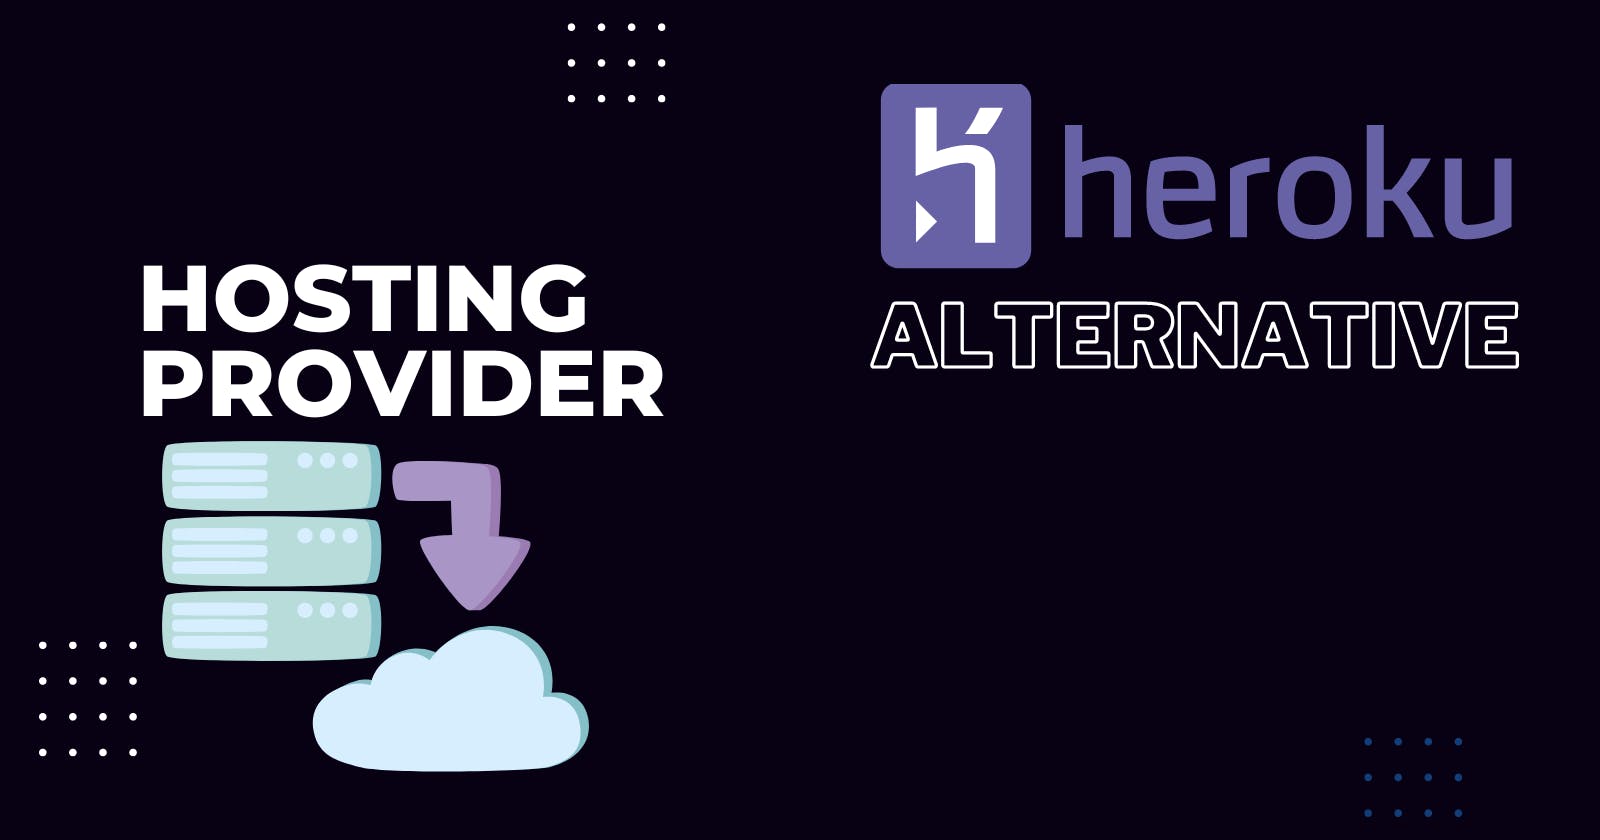 Other Free hosting services to consider after Heroku removed their free tier.